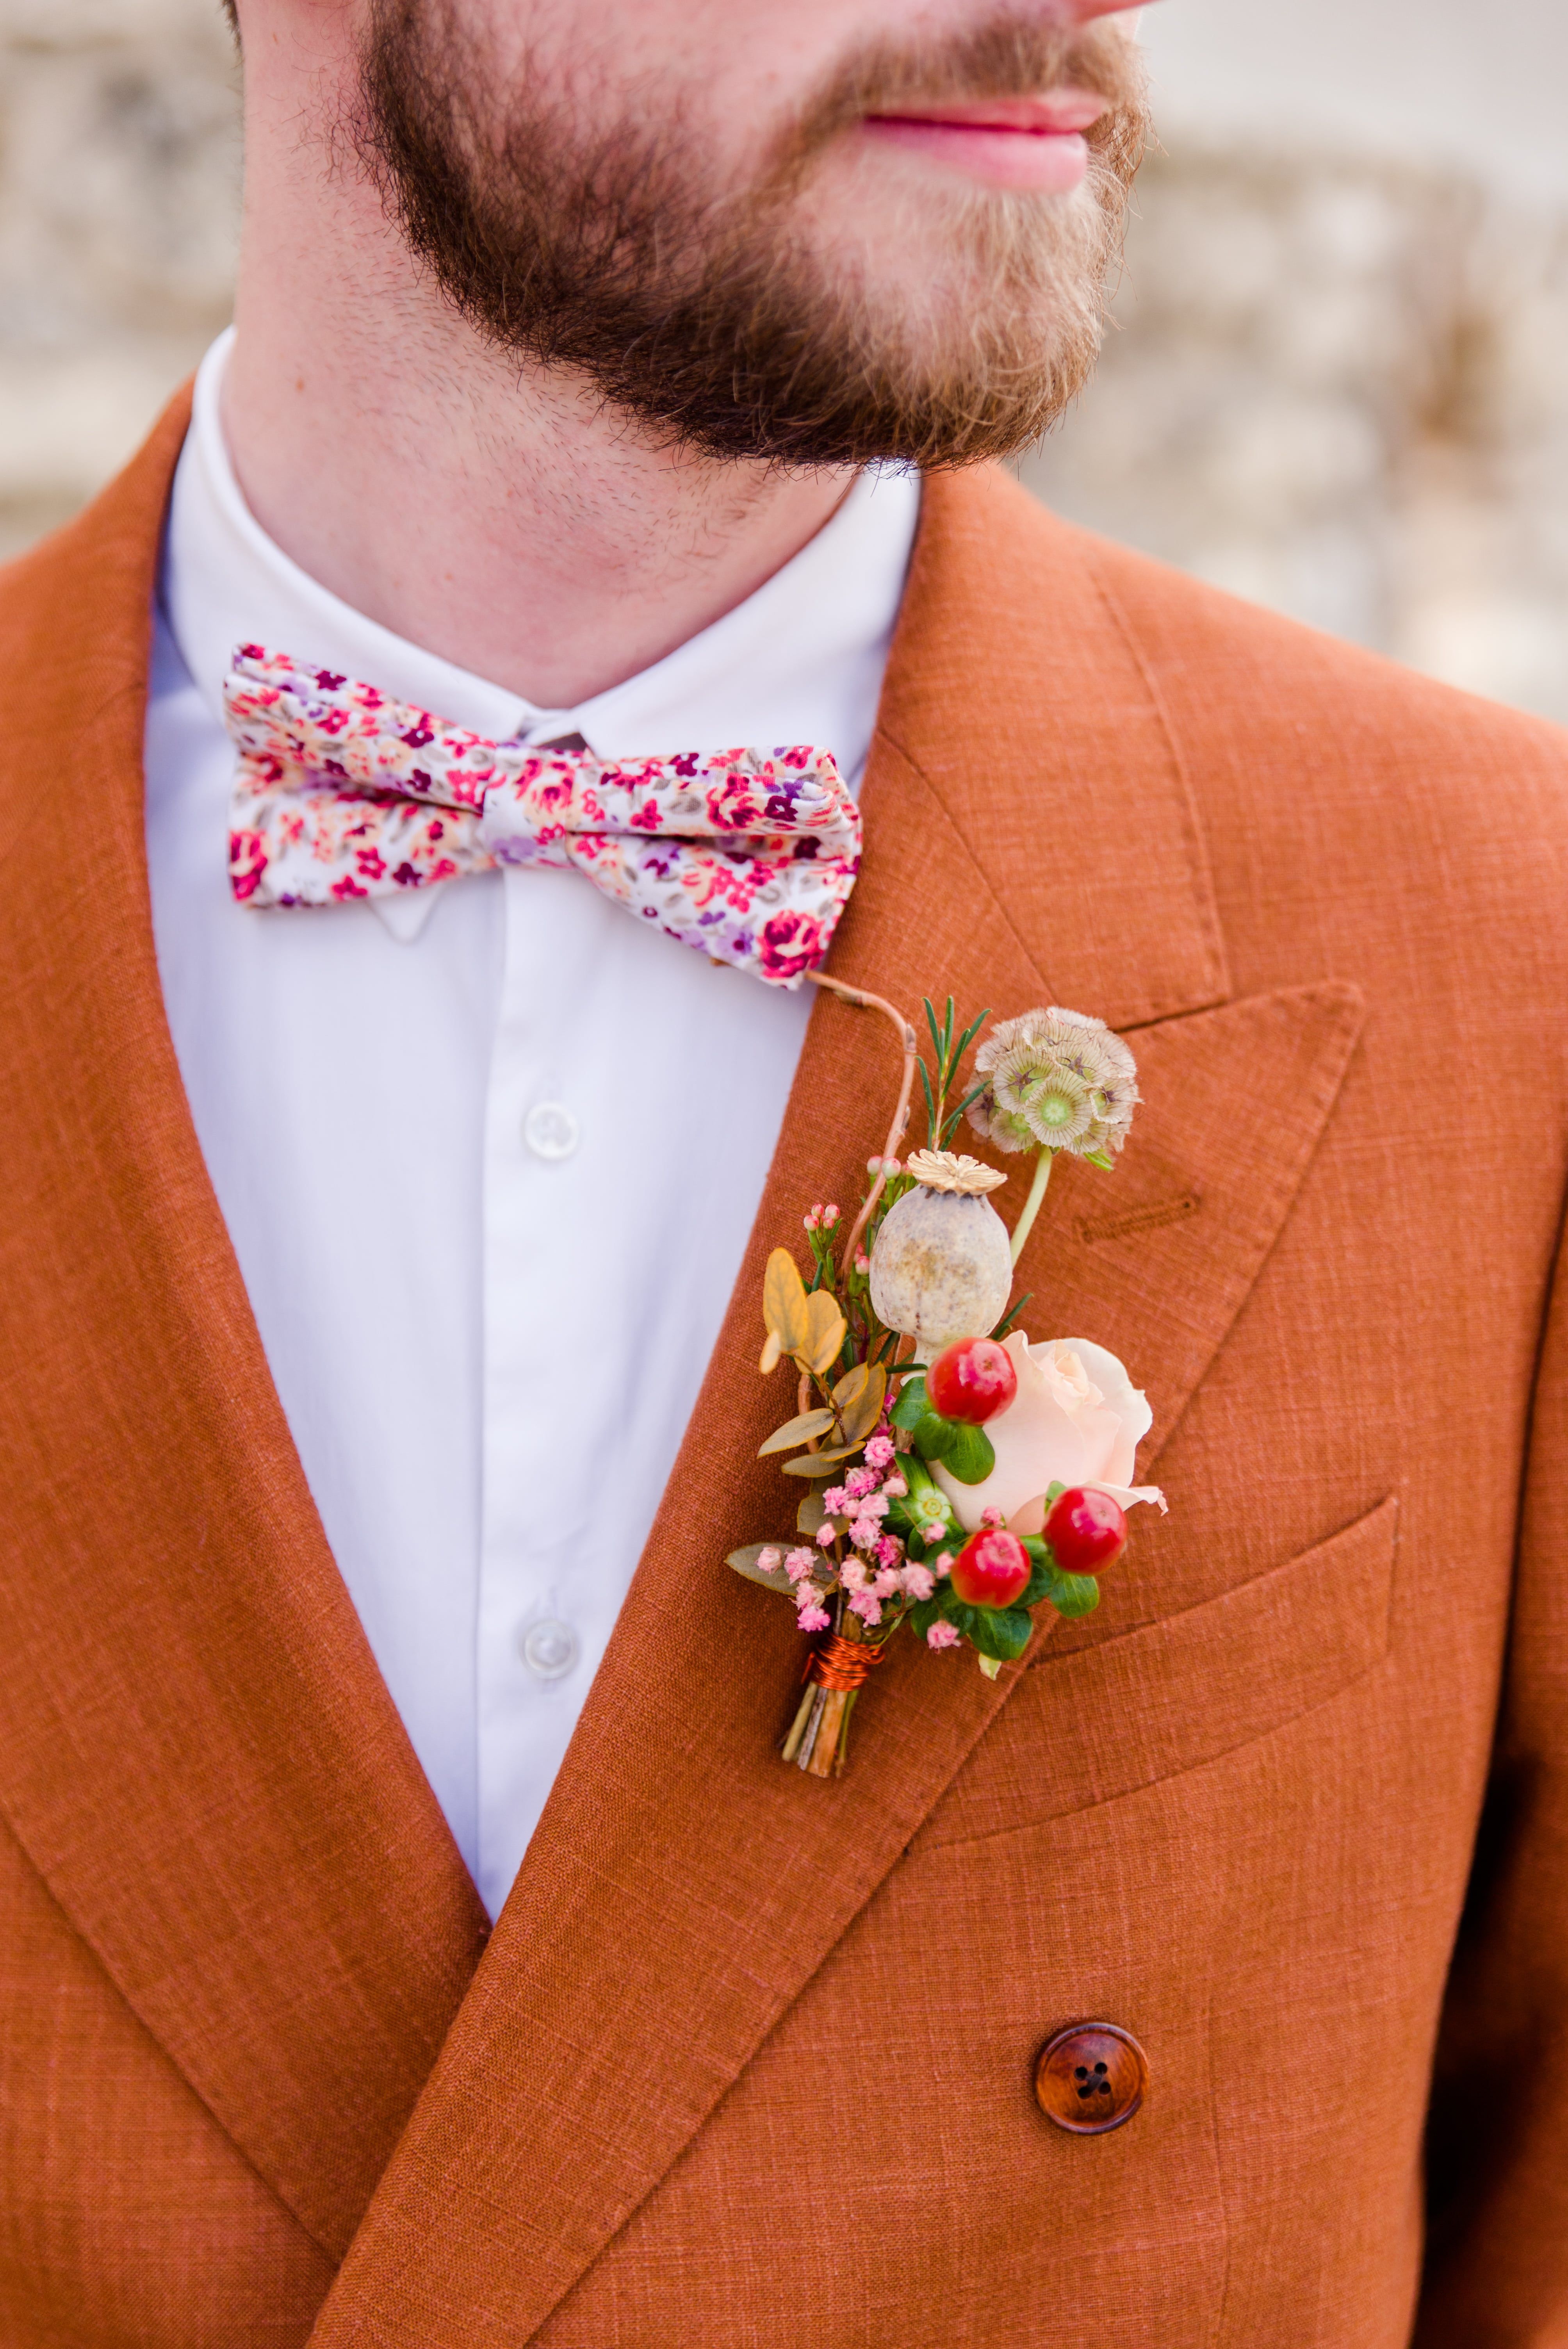 Groom wearing terracotta colored suit with dried flower boutonniere